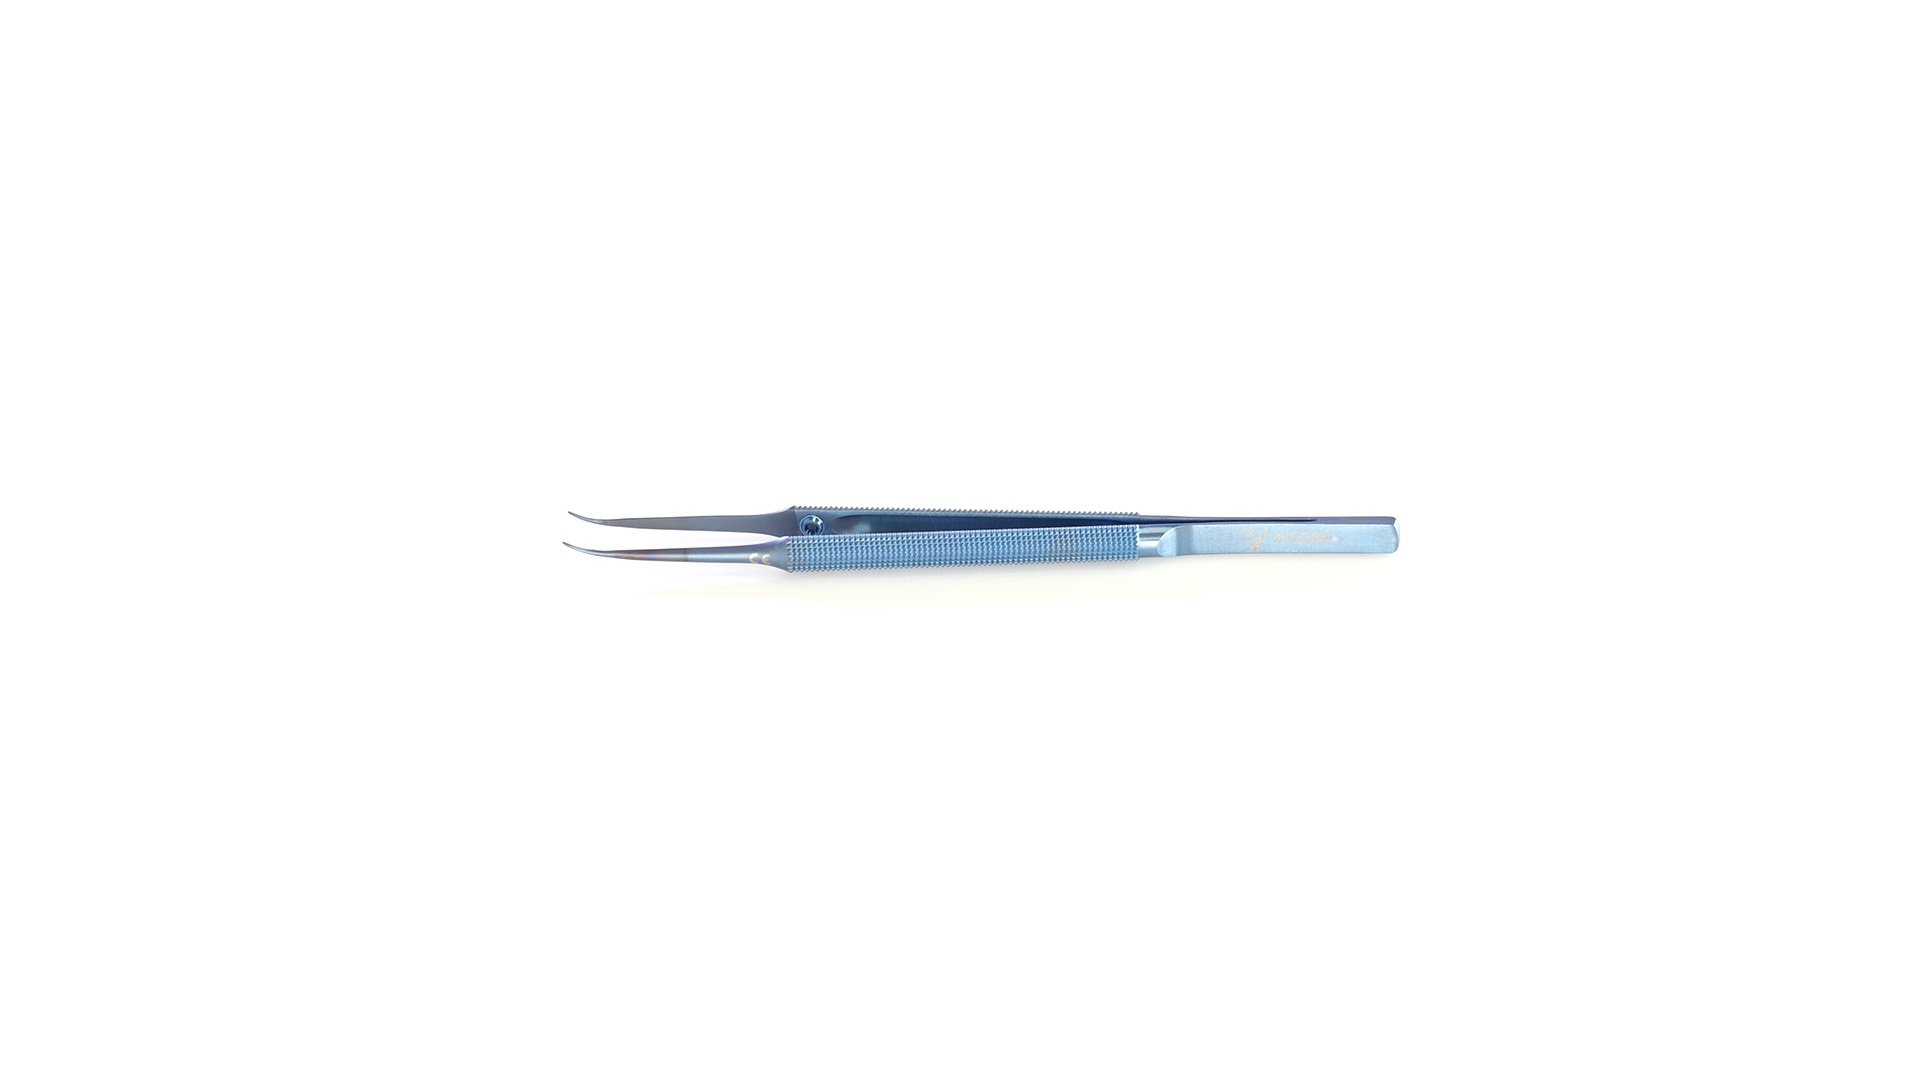 Micro Forceps - Curved 0.4mm concave/convex tips